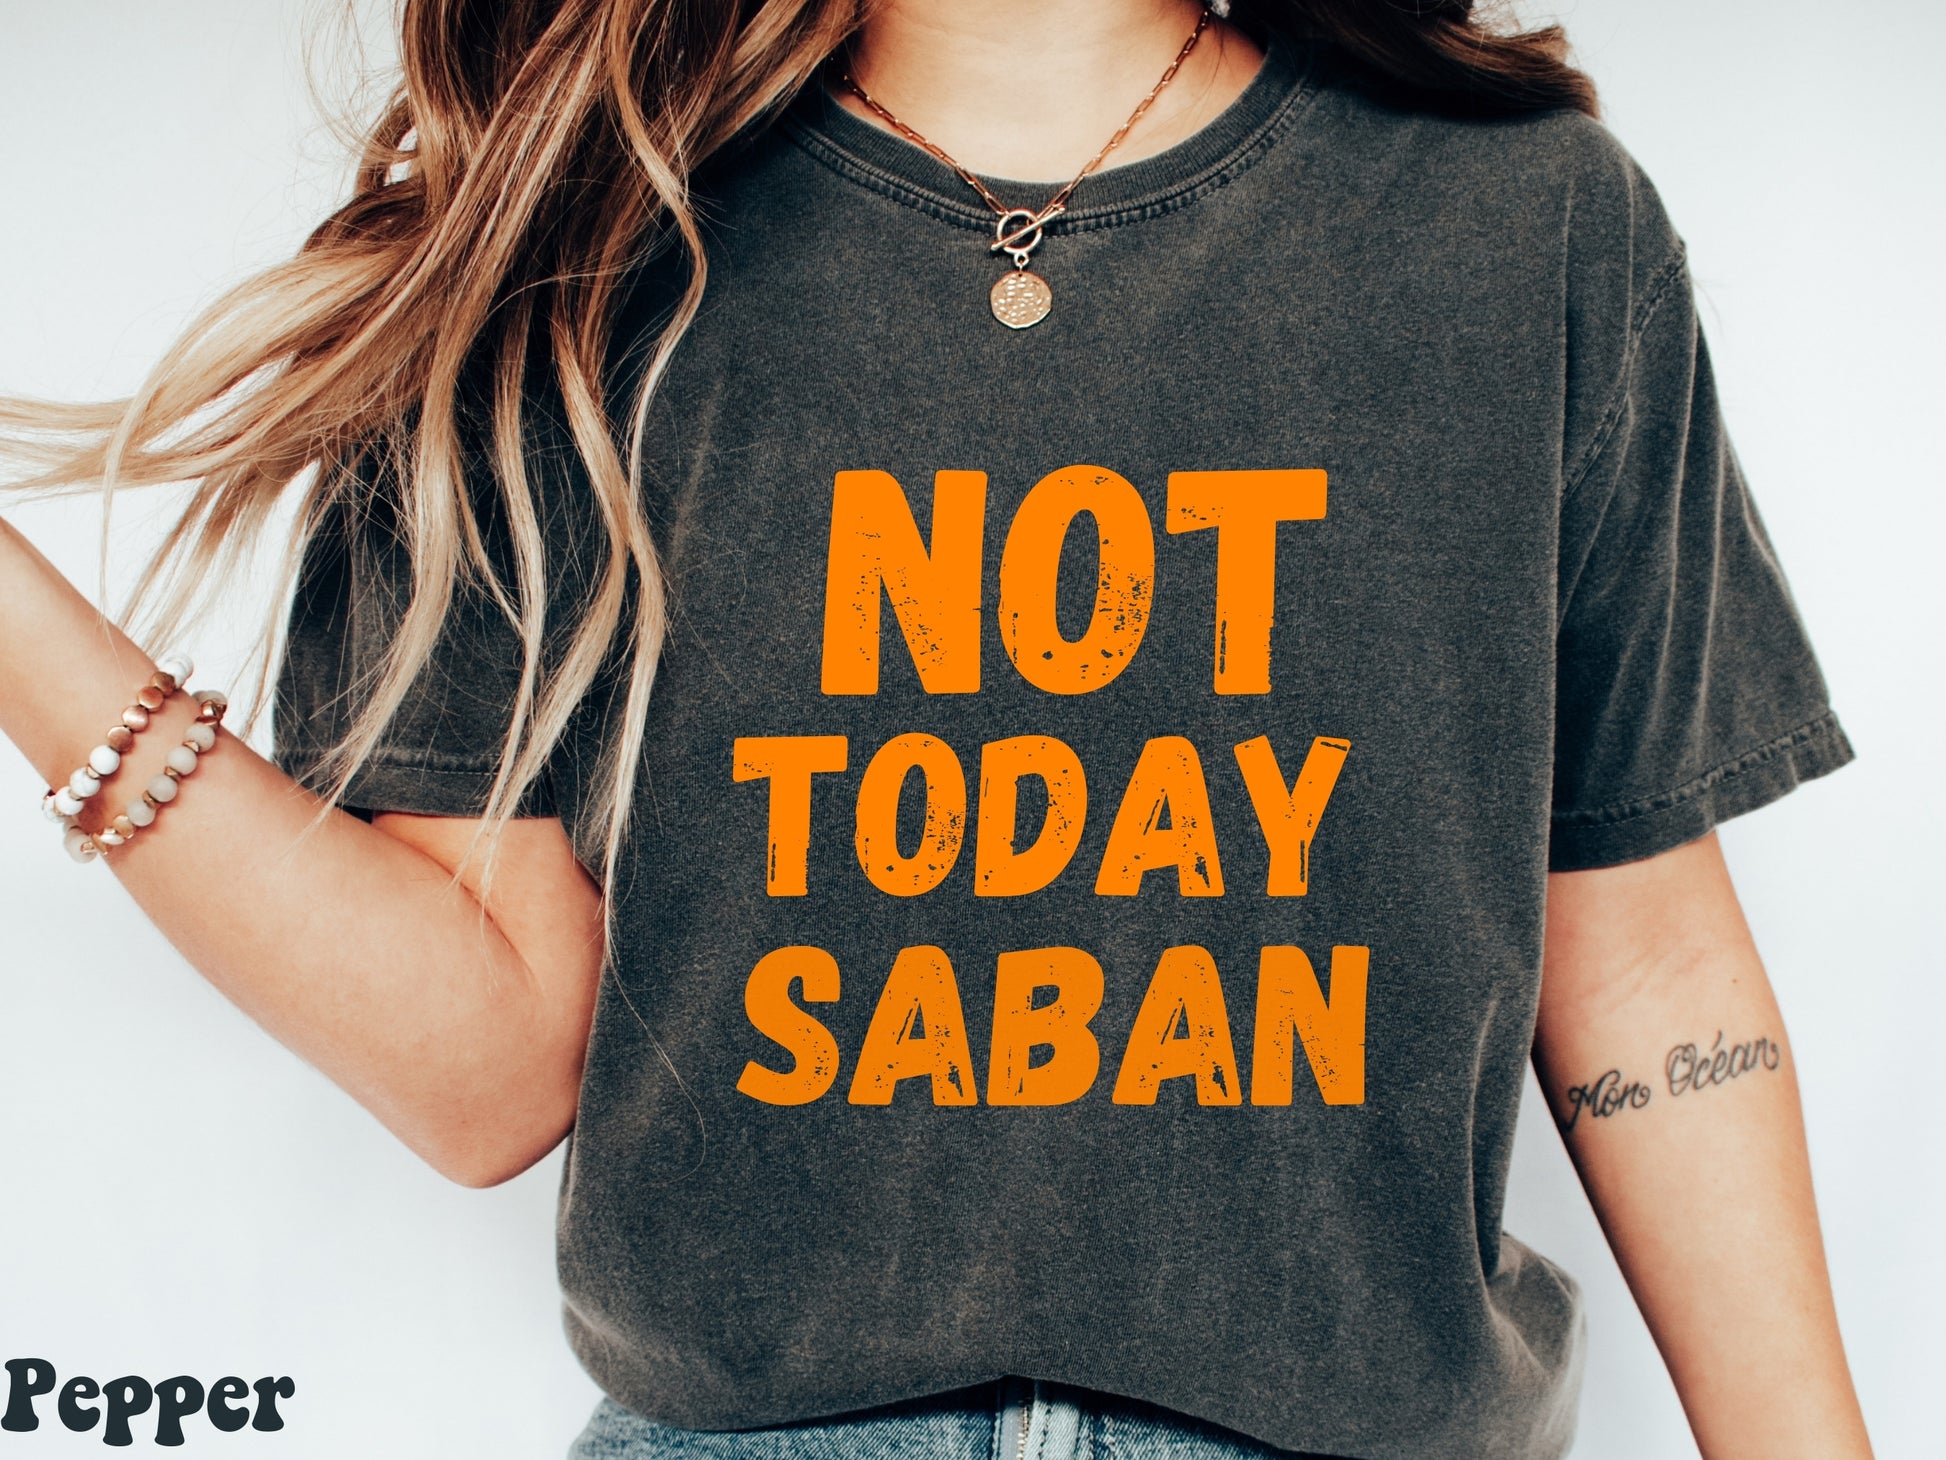 Tennessee Hat,Rocky Top Shirt,Not Today Saban, Funny Football Cap,Tennessee Vols,Cute Tennessee Hat,Tennessee Gameday,Tennessee Game Day,Knoxville,Cute Knoxville,Alabama vs Tennessee,Cute Rocky Top,Tennessee Tailgating